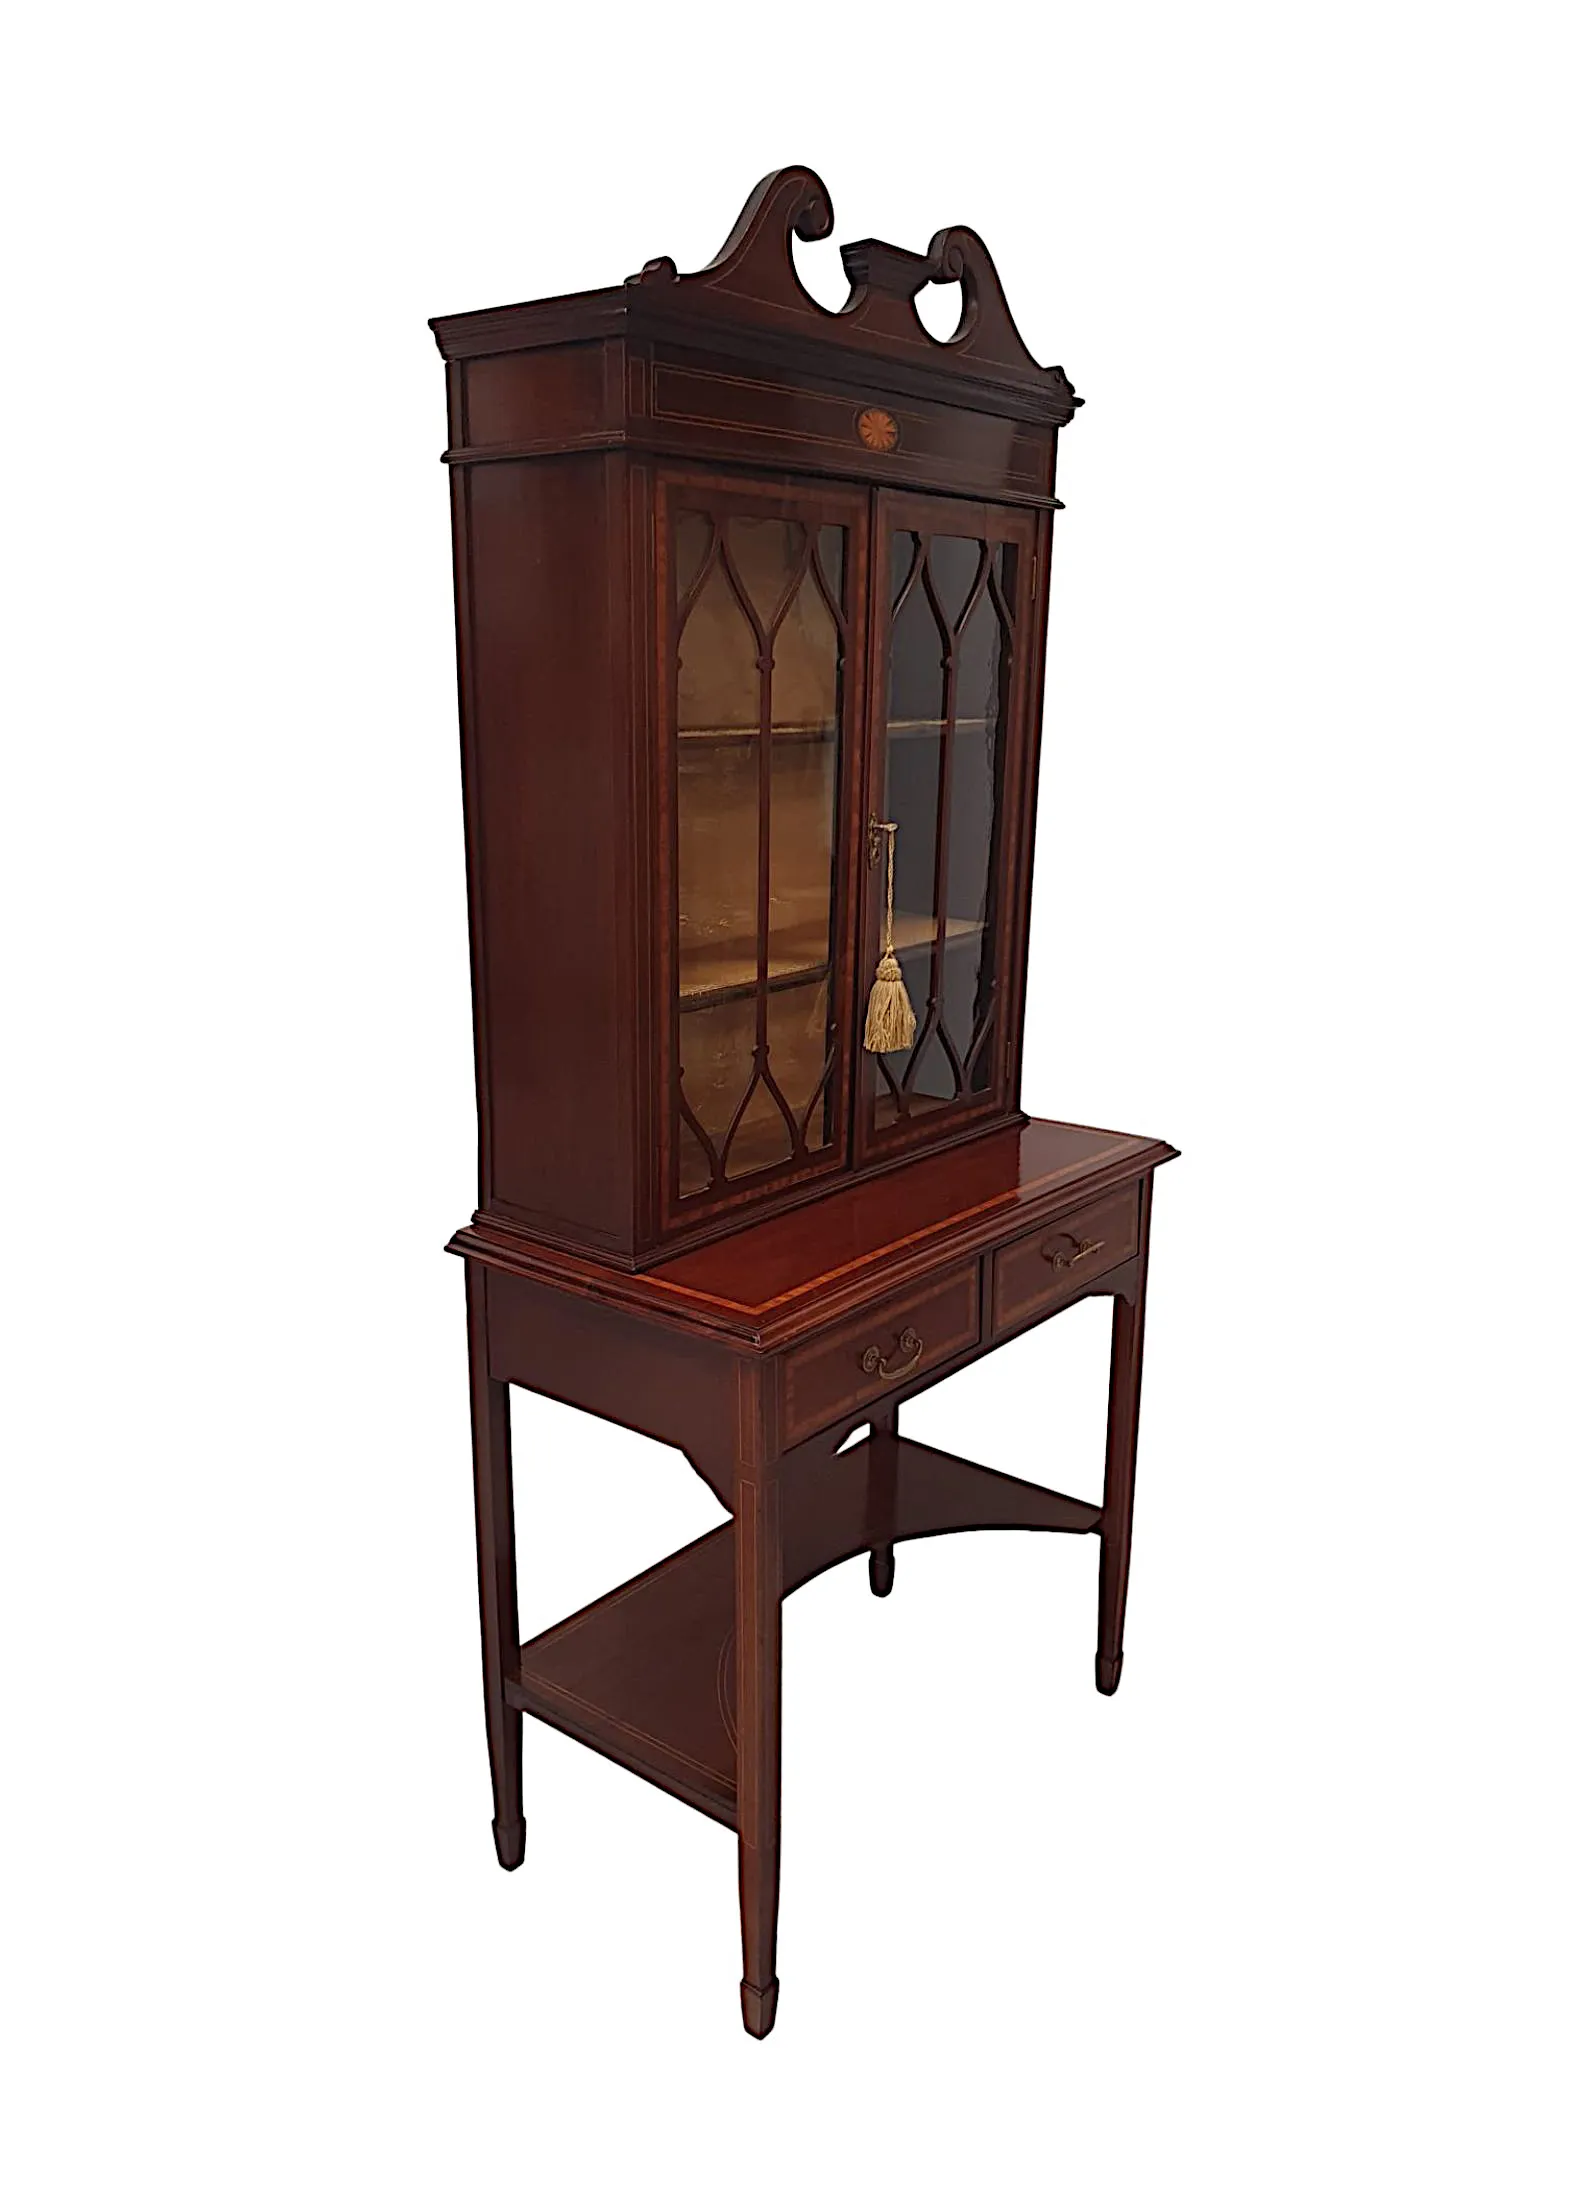 A Fabulous Edwardian Inlaid Display Case or Bookcase